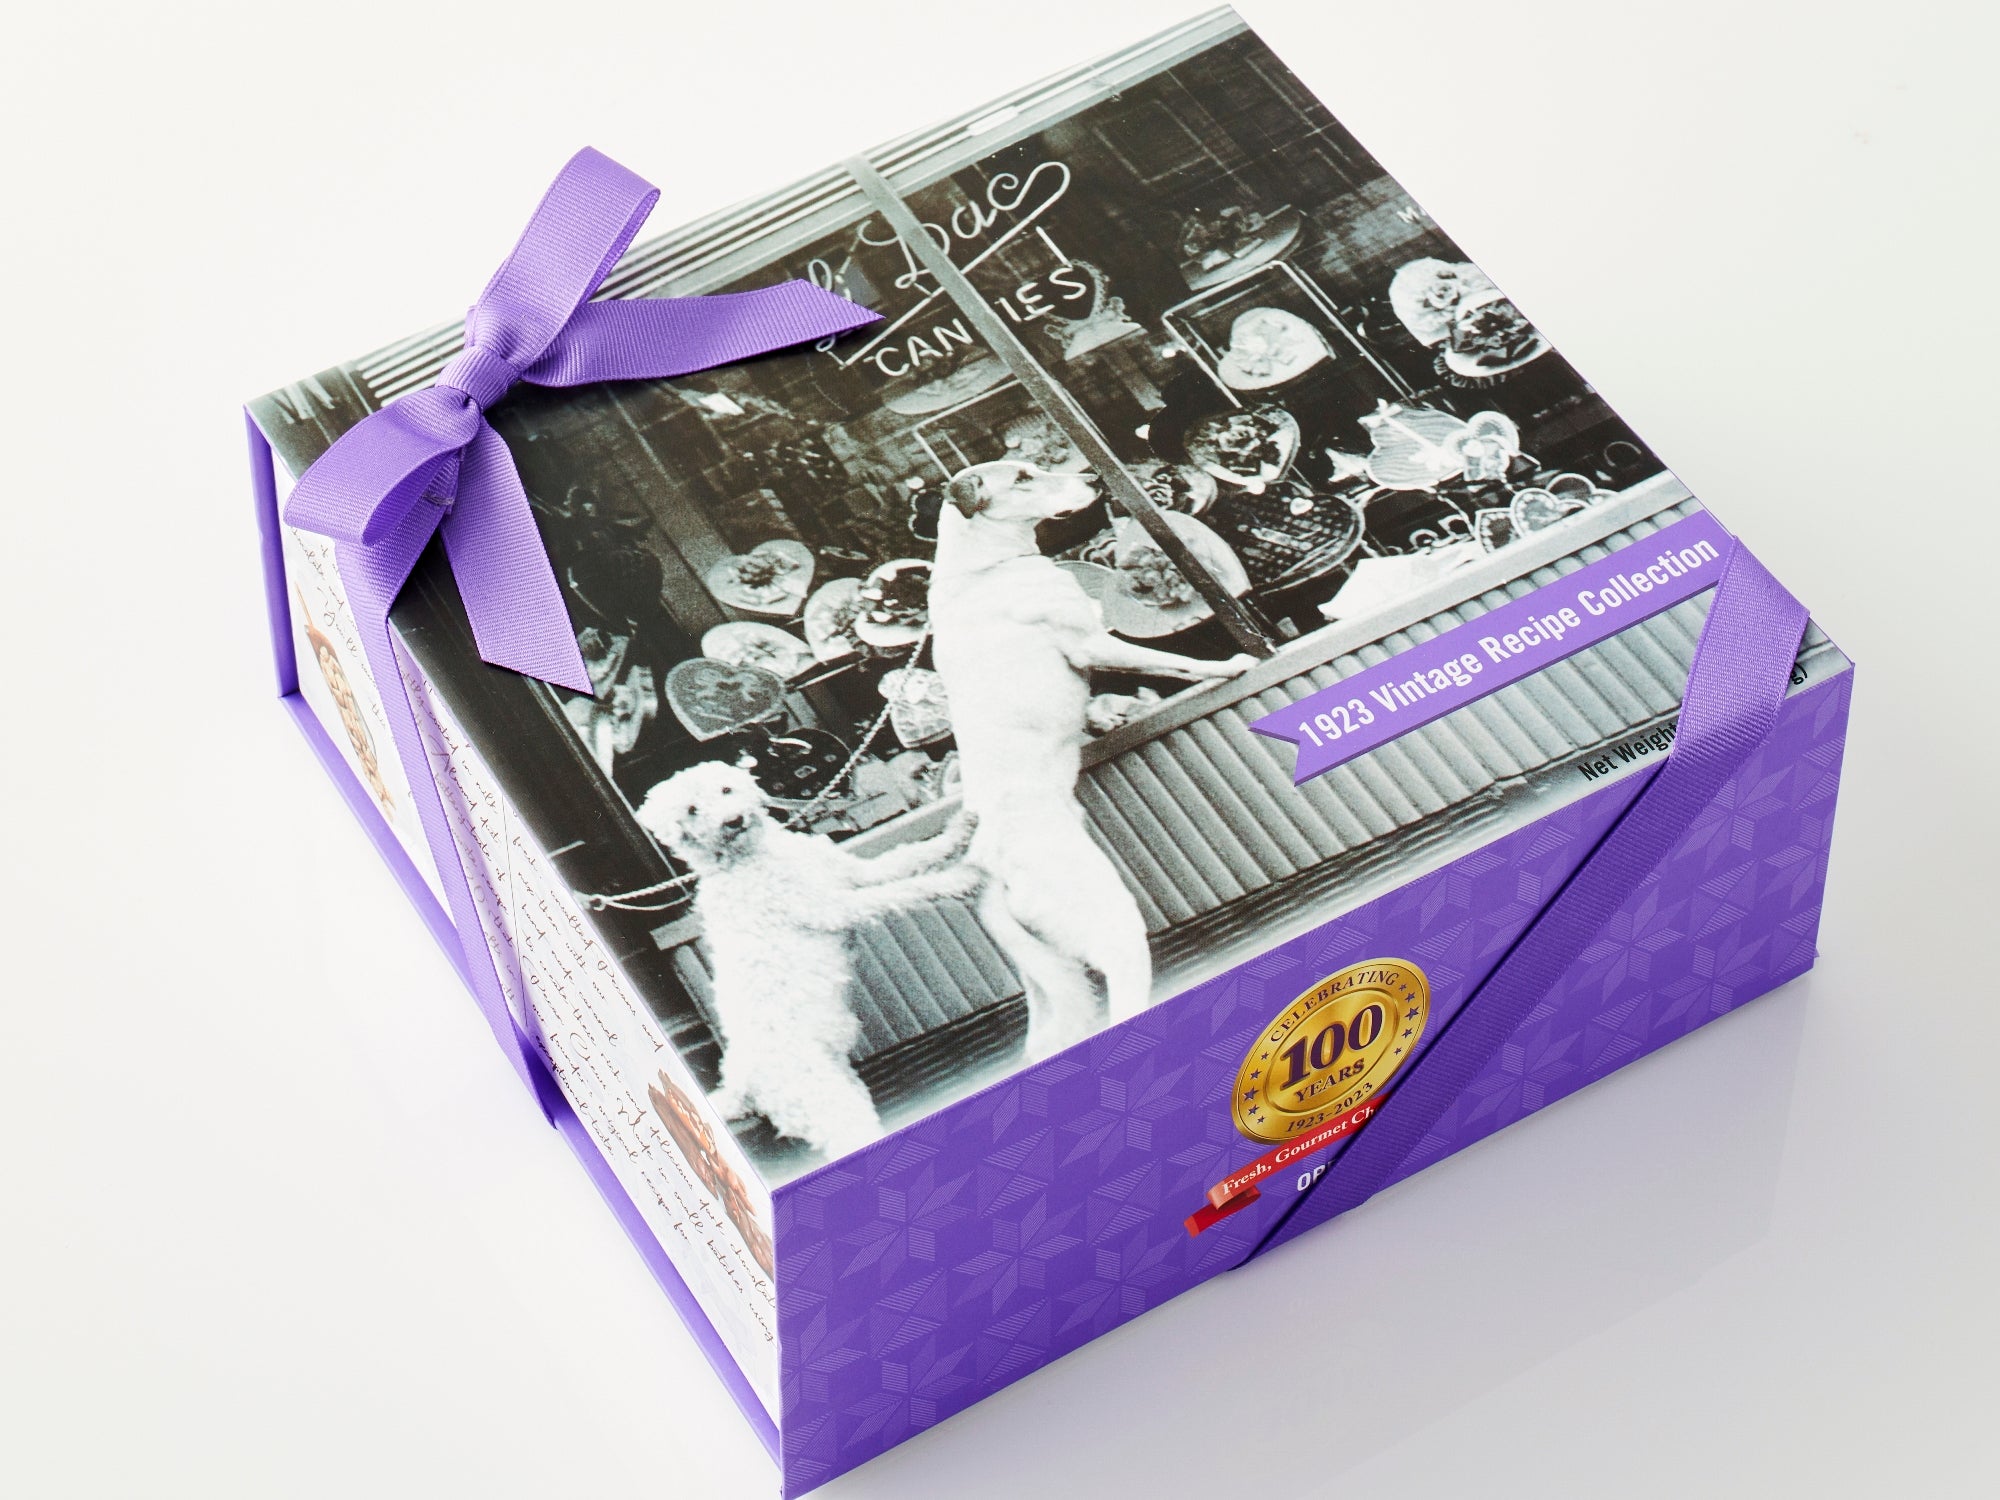 Vintage Collection (Limited Edition 100 Year Chocolate Gift Box. 2 lb. Box)